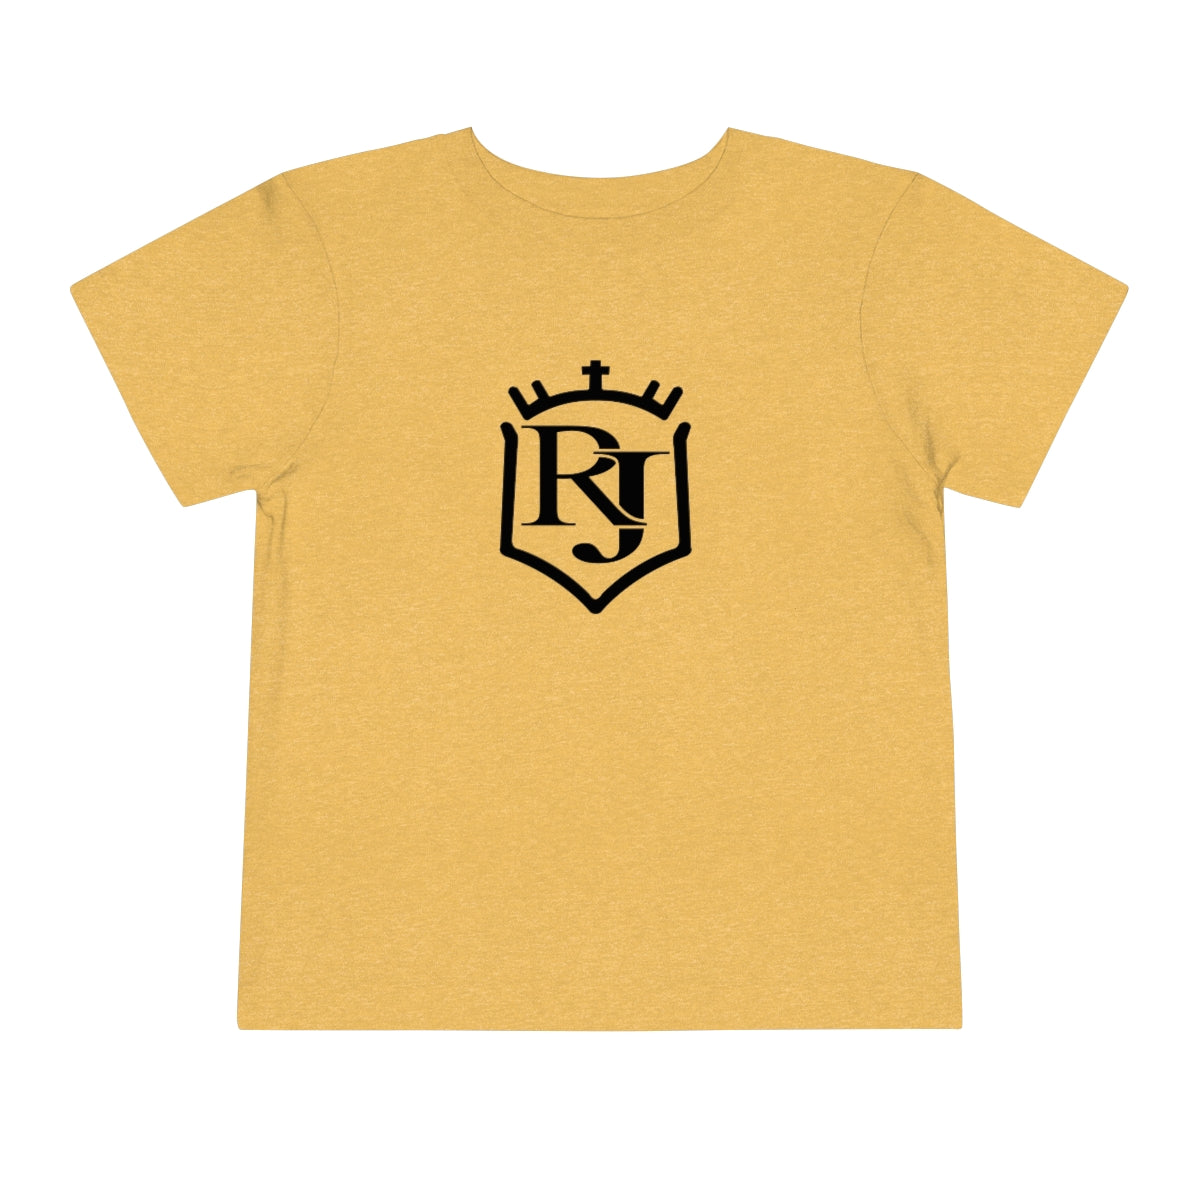 R J Escudo Toddler 2T,3T,4T,5T Short Sleeve Tee